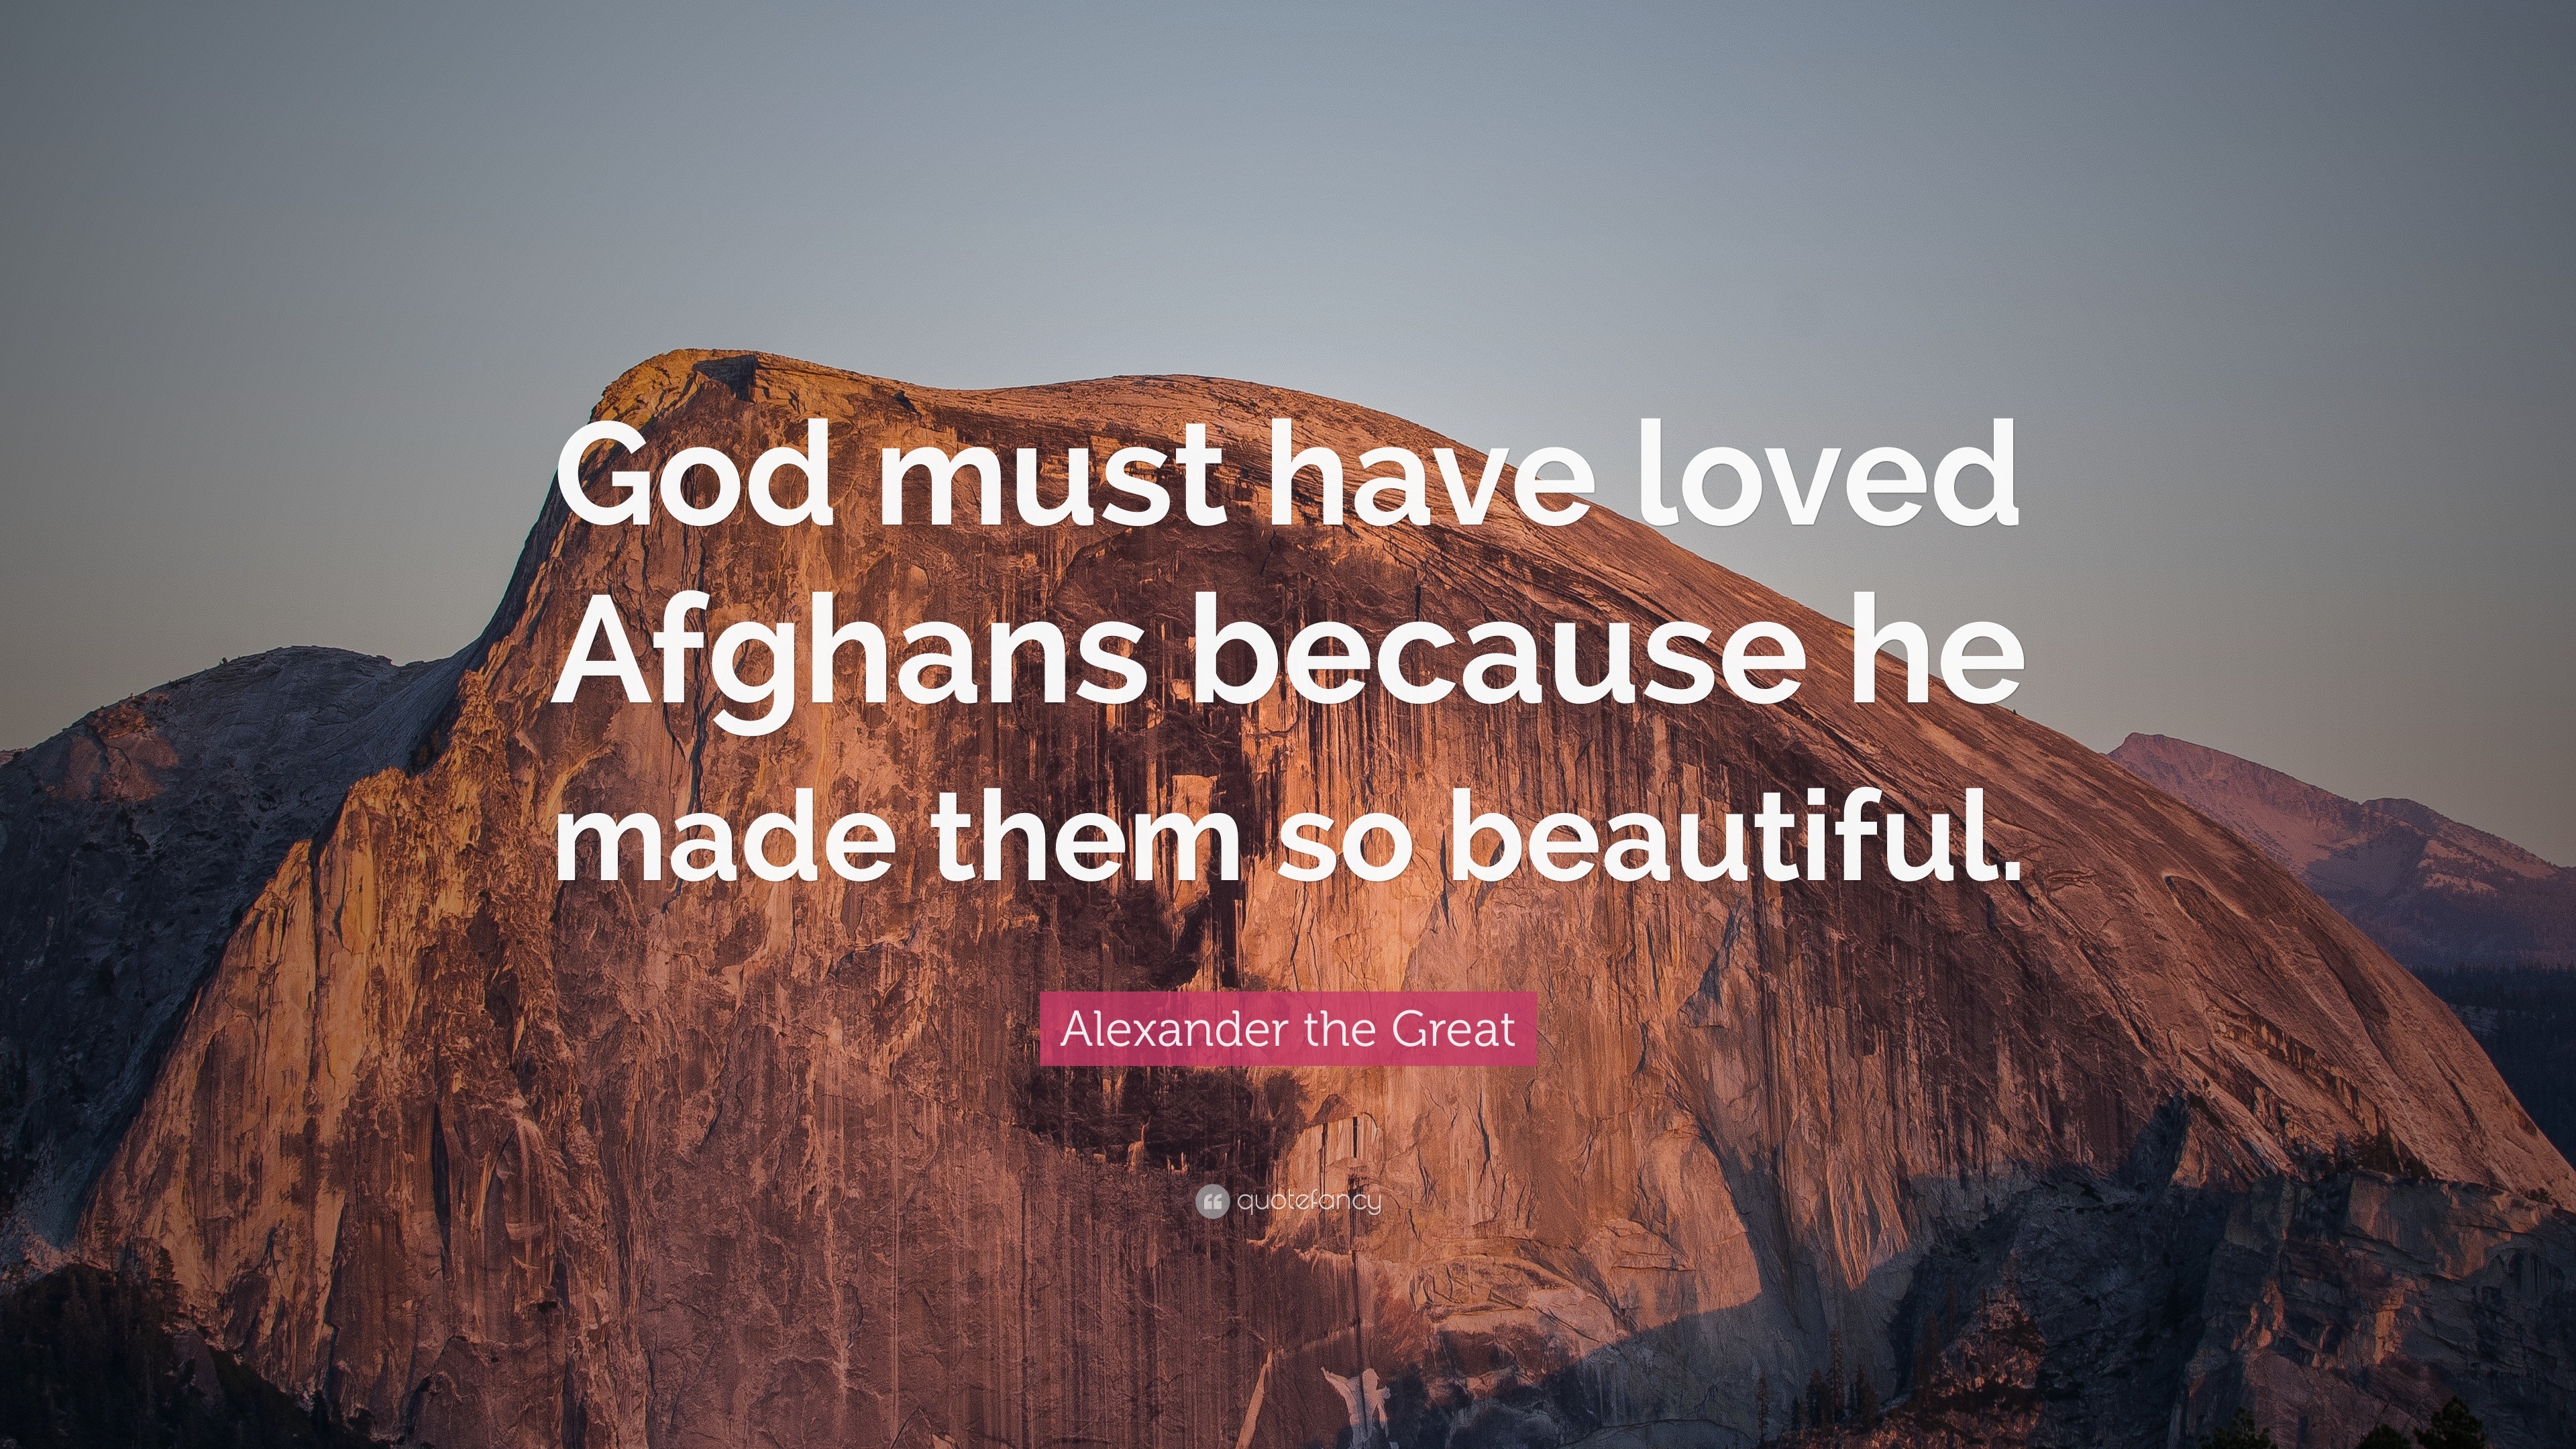 Alexander The Great Quote: “God Must Have Loved Afghans Because He Made Them So Beautiful.”